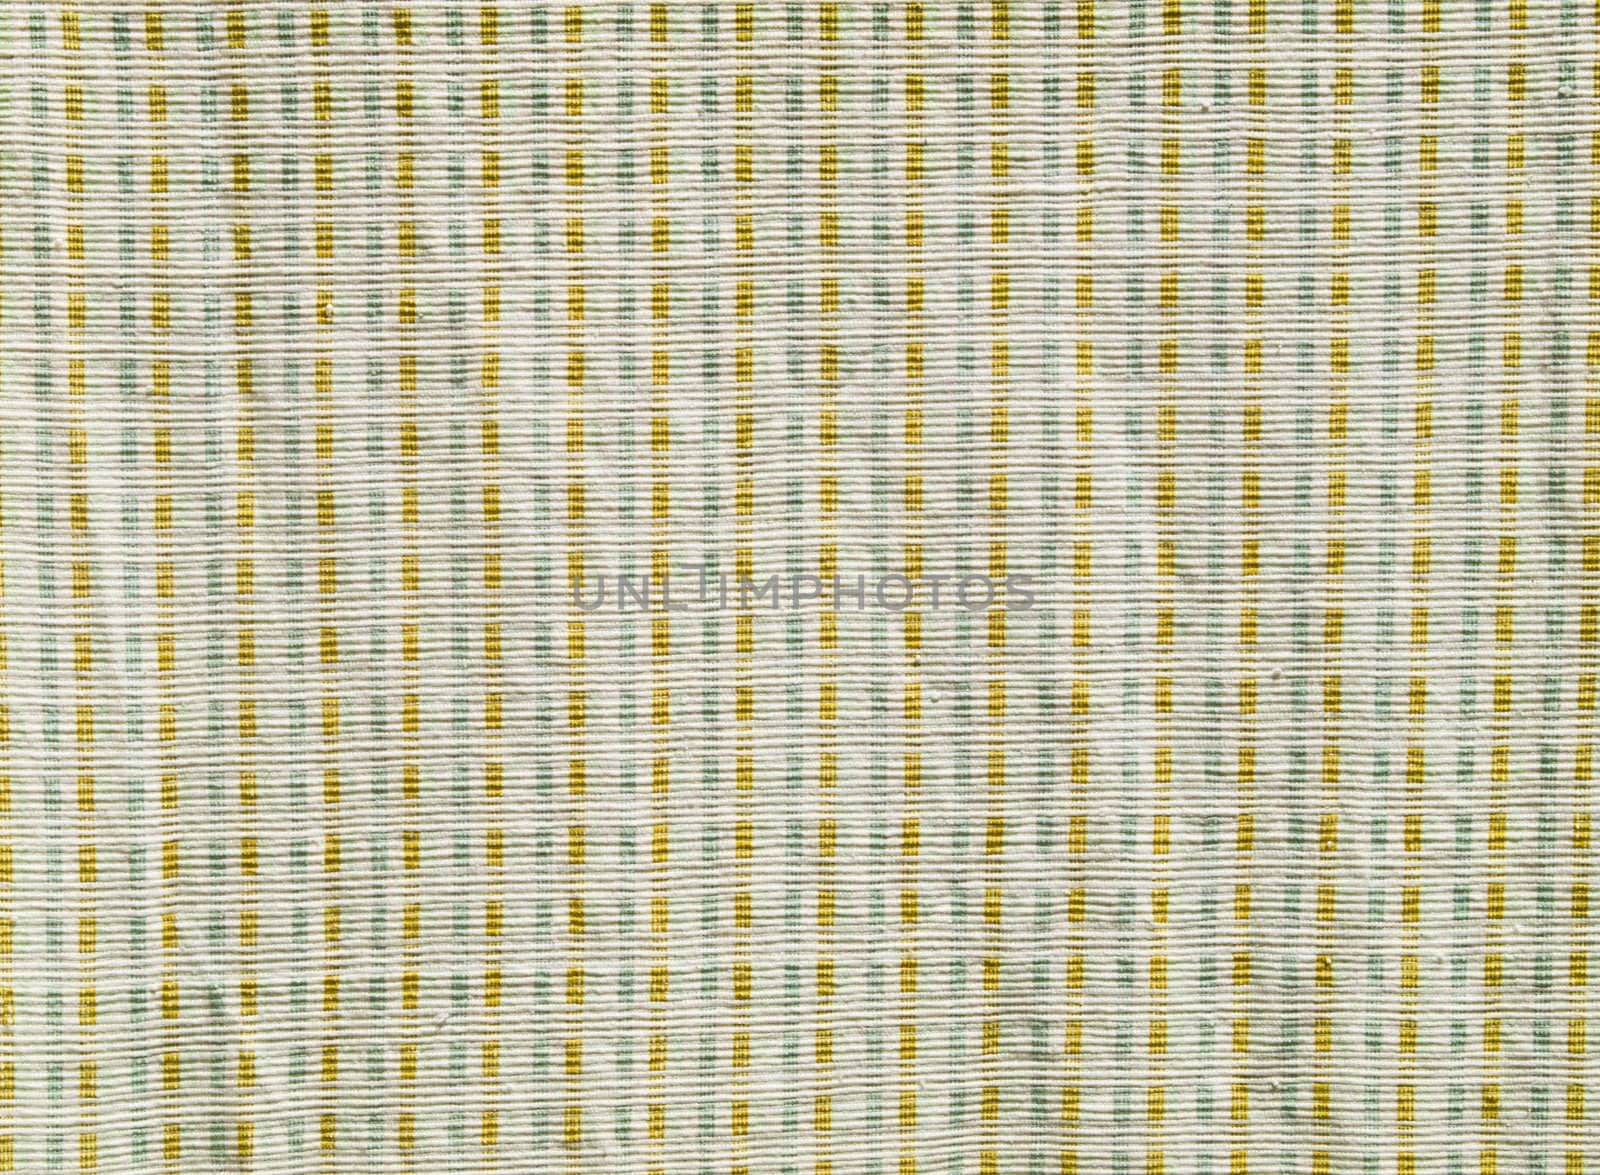 Cotton fabric from Thailand as background by gururugu